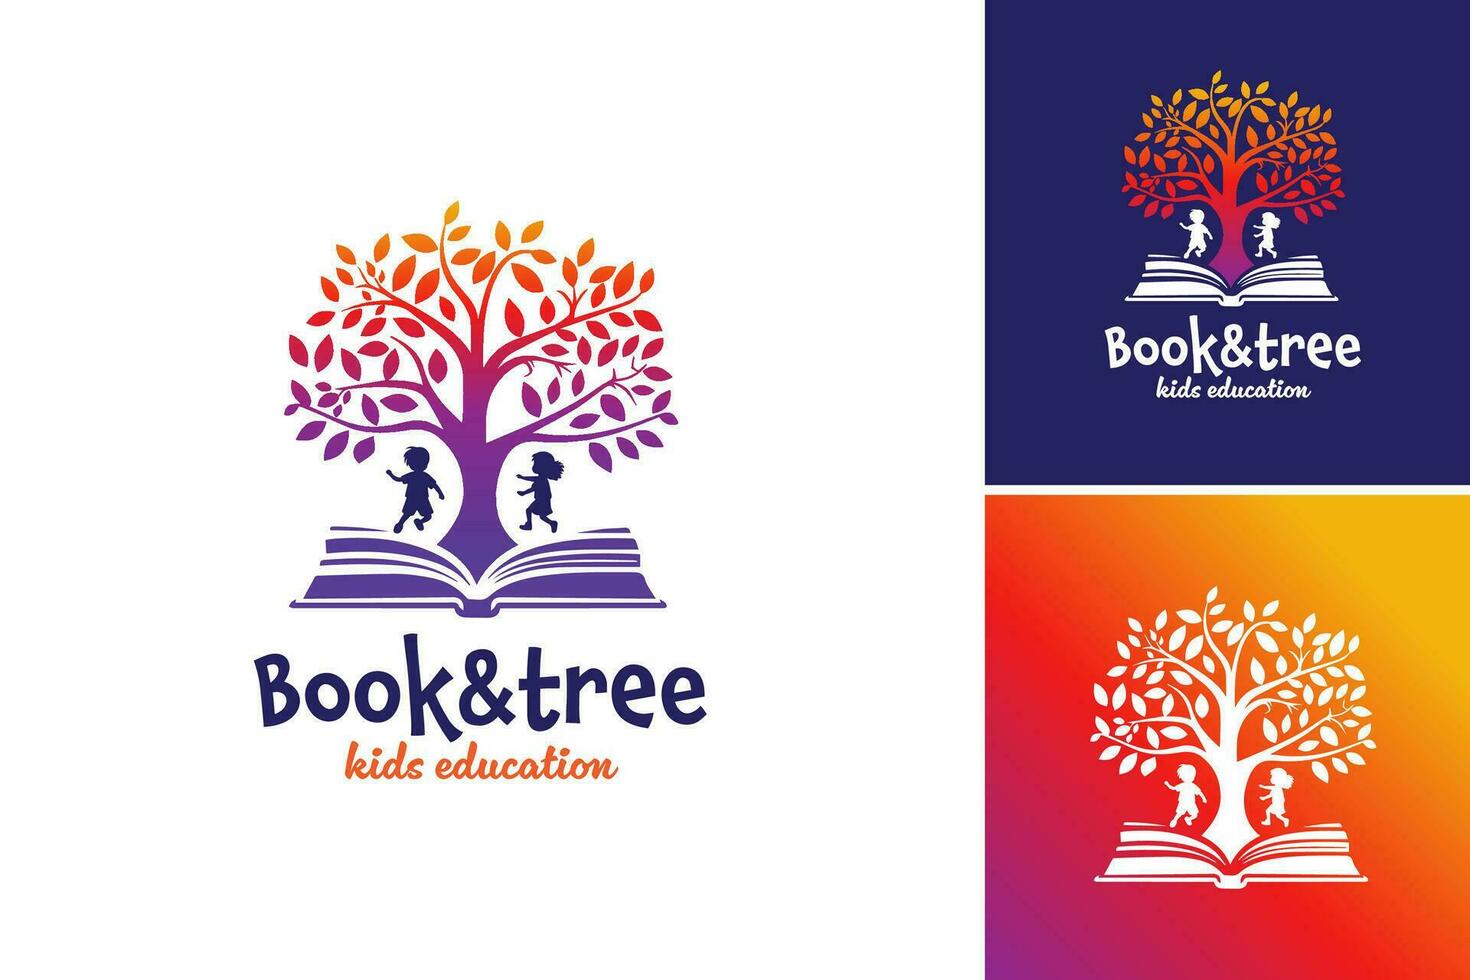 book and tree education logo design. it is perfect for educational materials or designs related to learning, teaching, or environmental awareness. vector